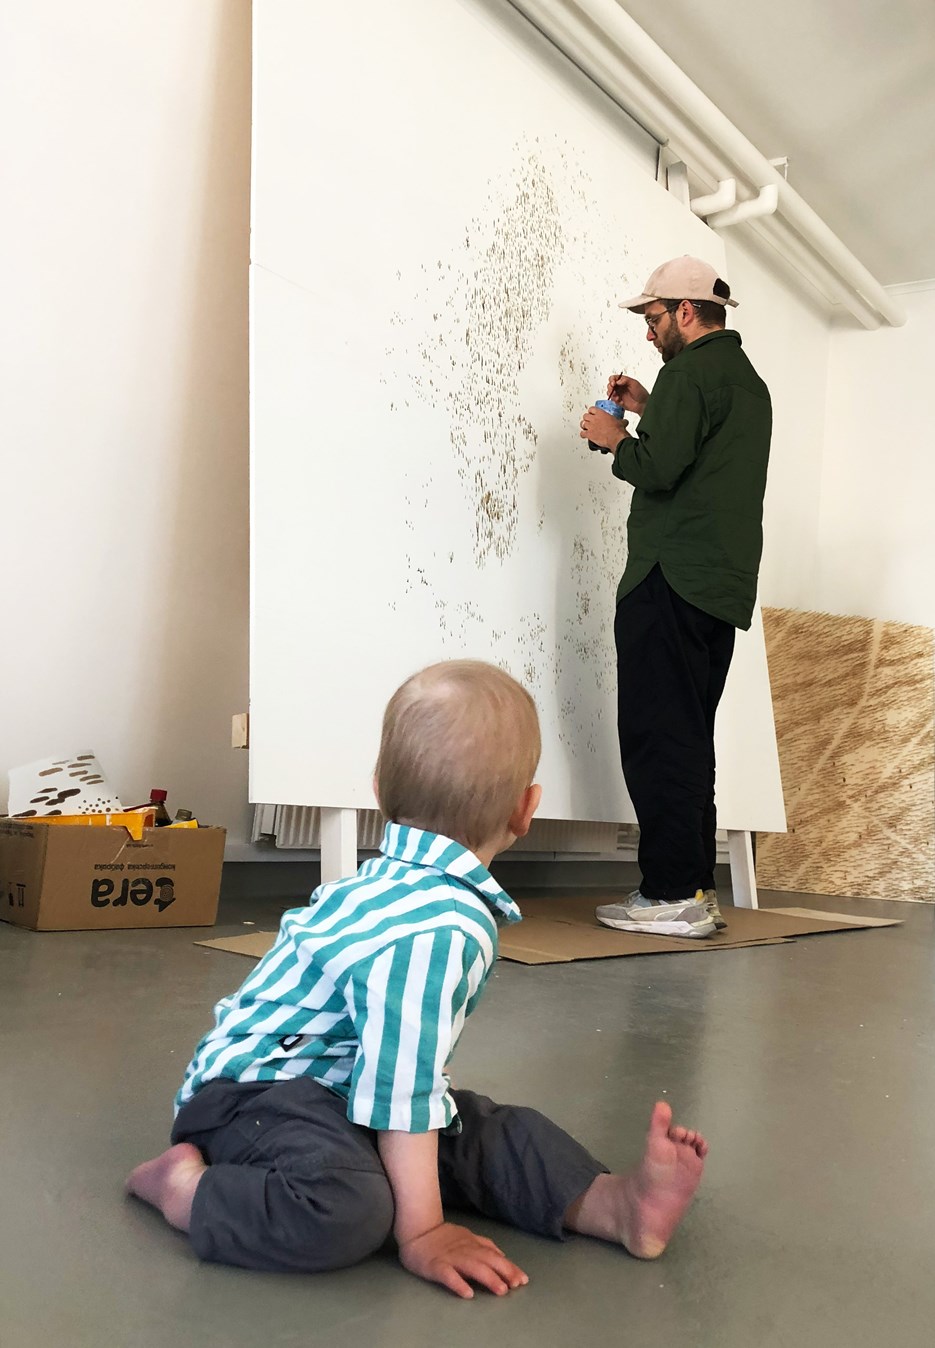 A man is painting with tar on a canvas, and a toddler is watching in the foreground